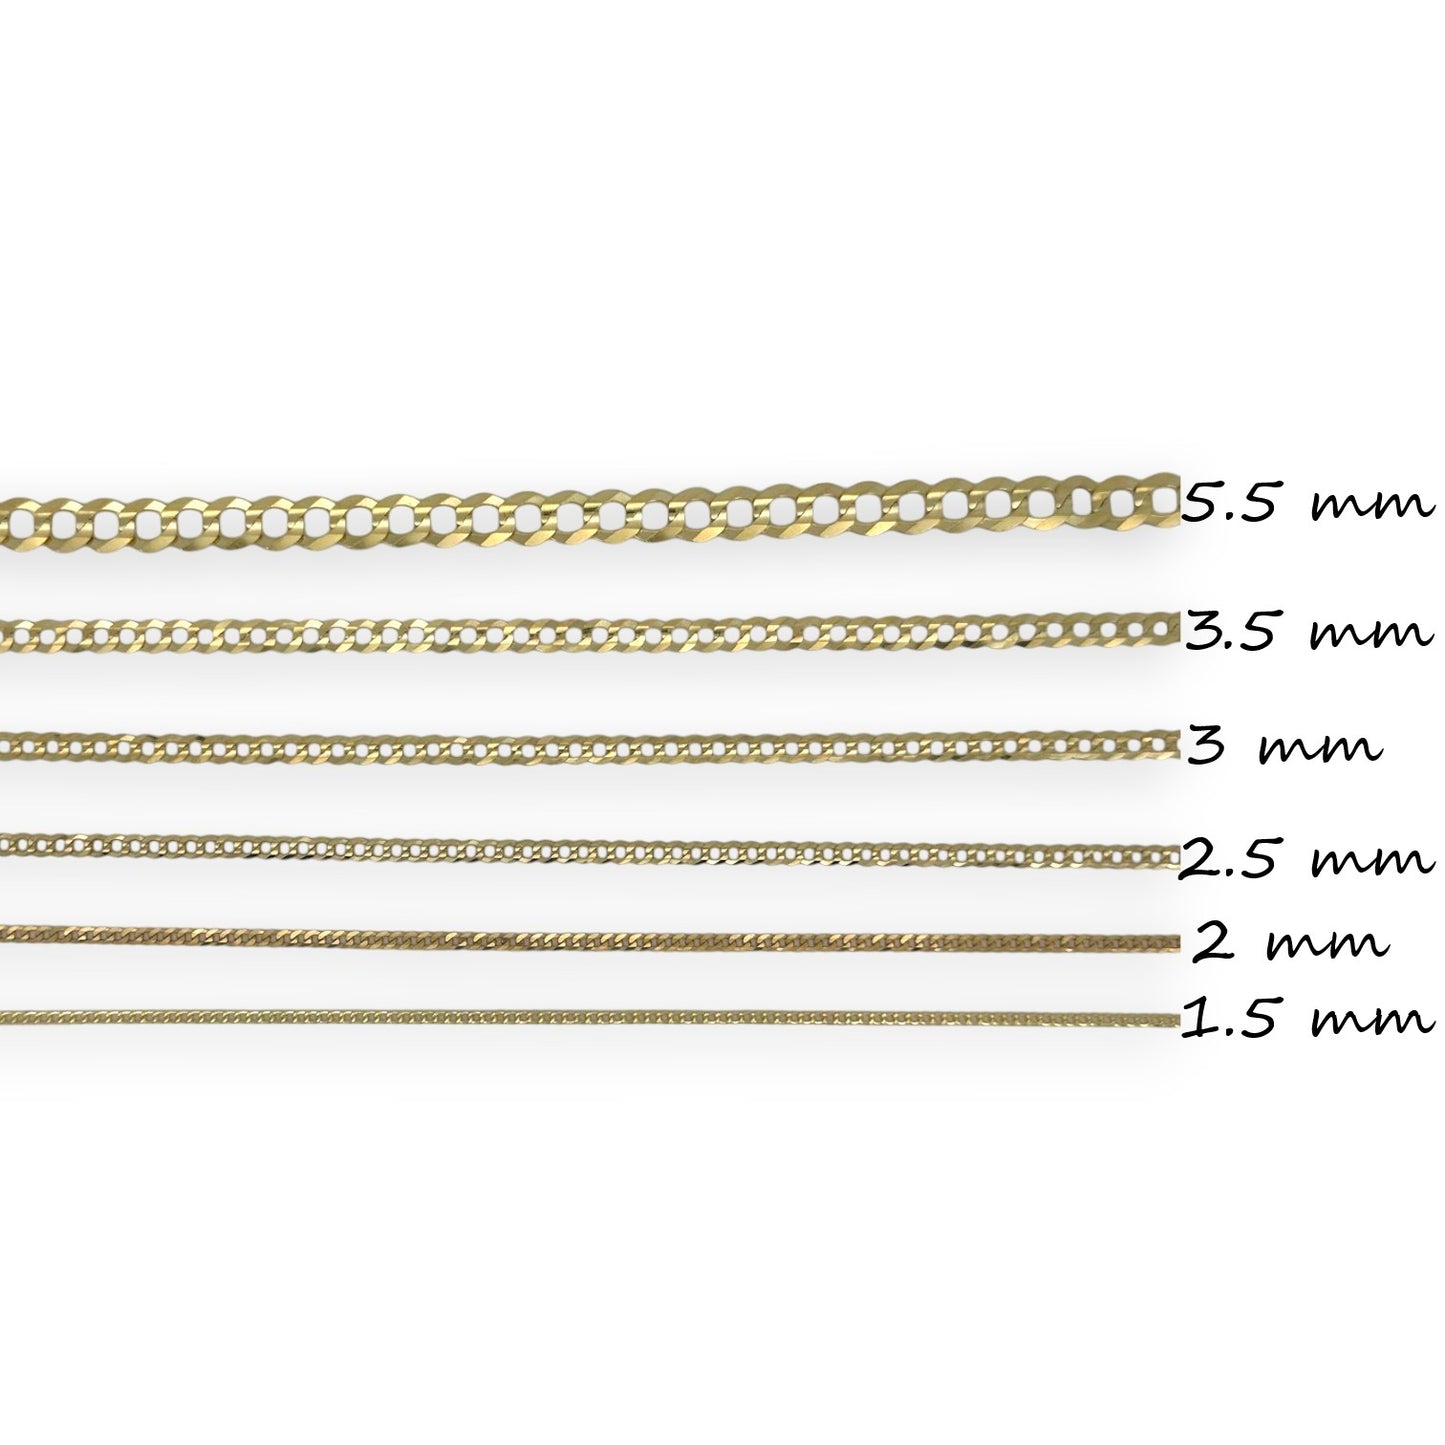 10K Fully Solid Miami Link Anklet - 10K Yellow Gold